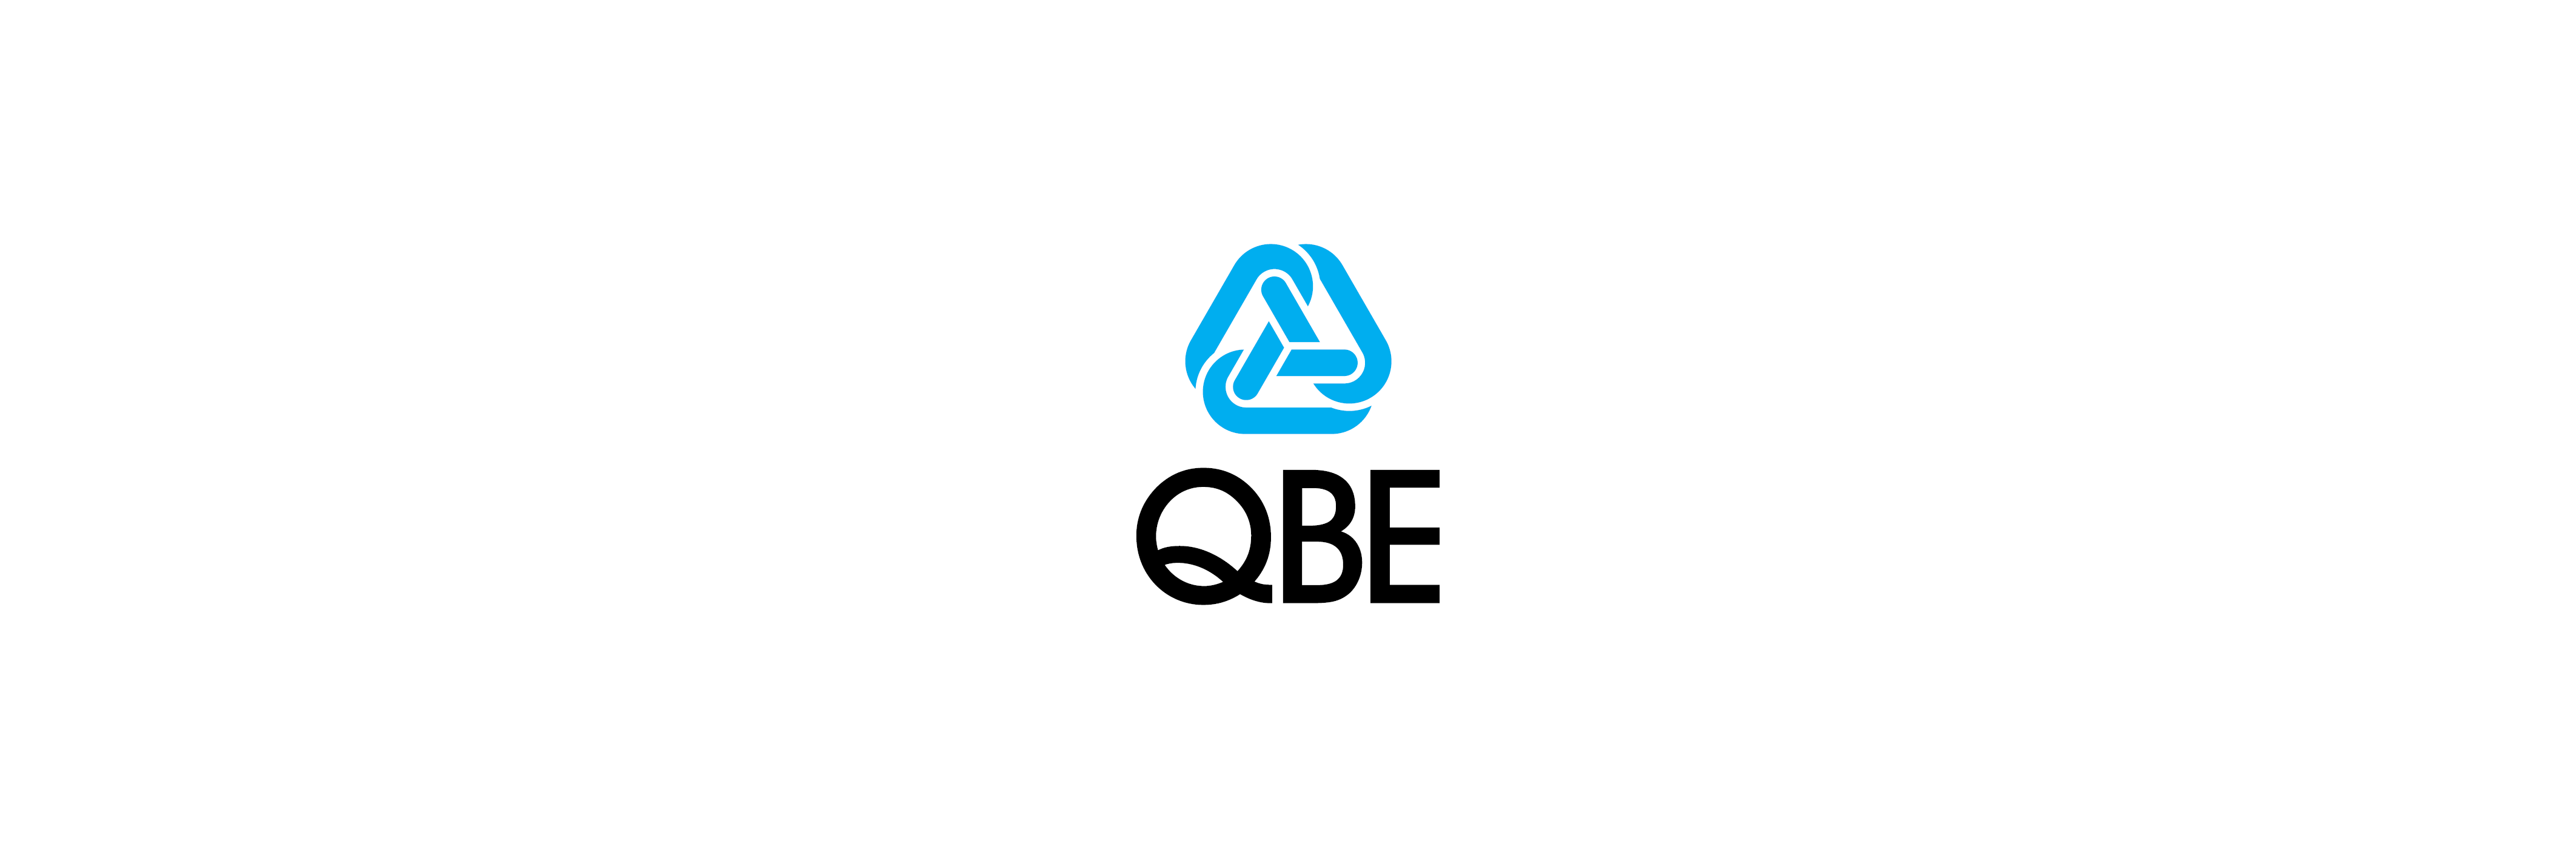 does qbe have travel insurance